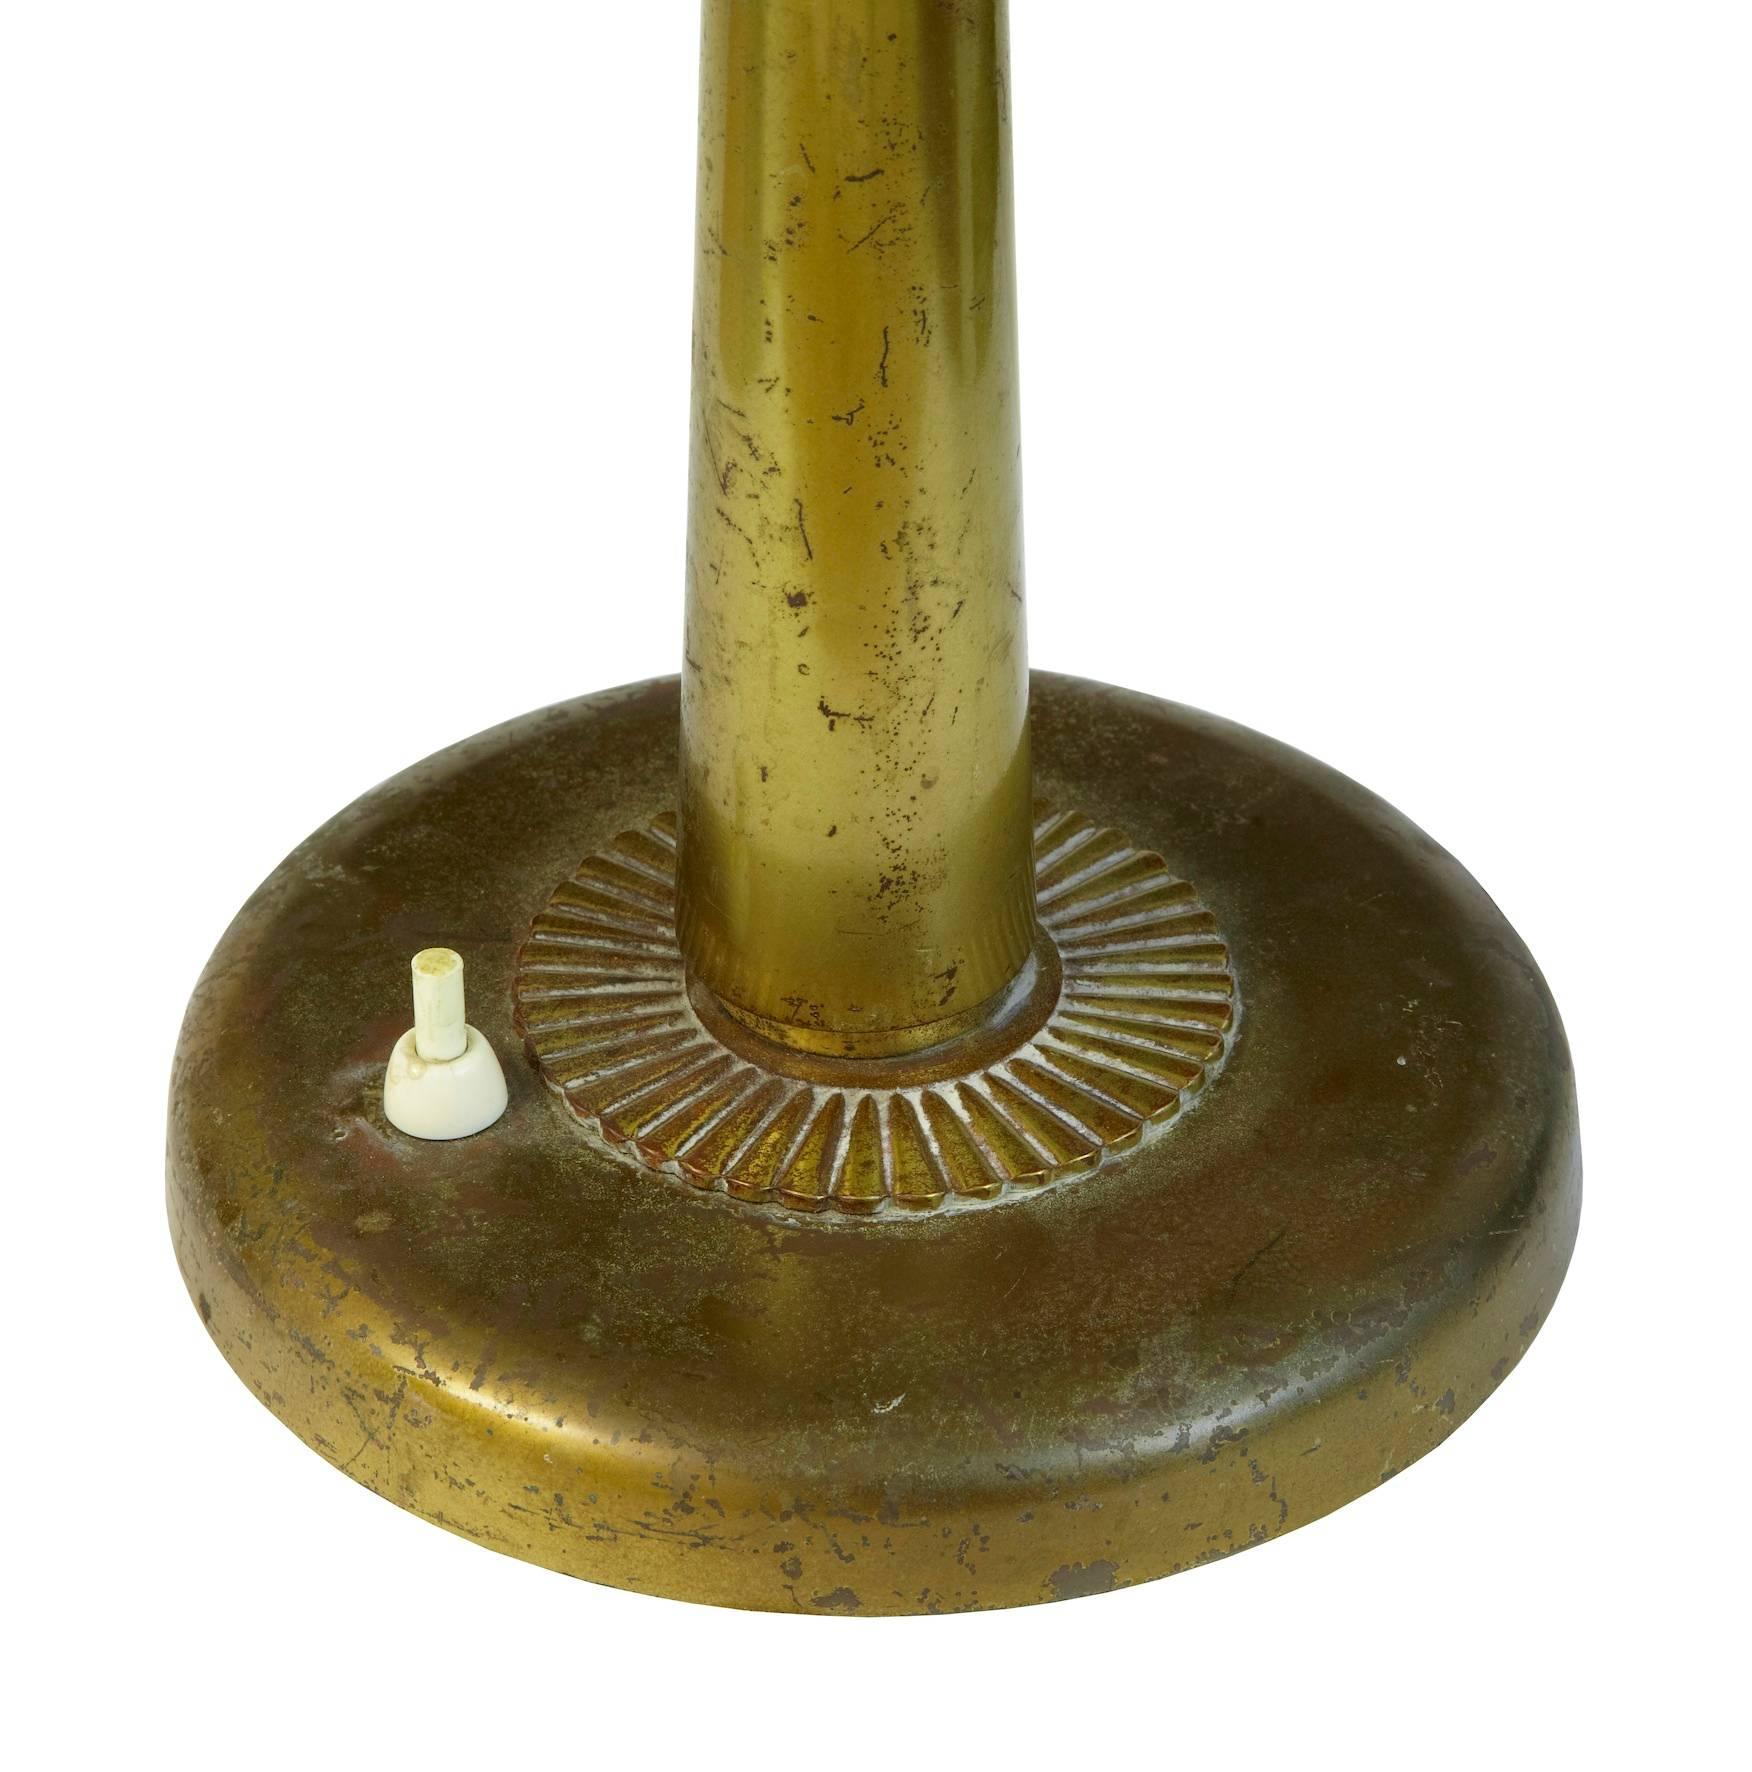 Quality brass desk lamp circa 1920.
Excellent round shape which has no dents or dings.
Some tarnishing and marks (see pictures)
2 electrical fittings, currently wired with european 2 pin plug.
We recommend having this light professionally